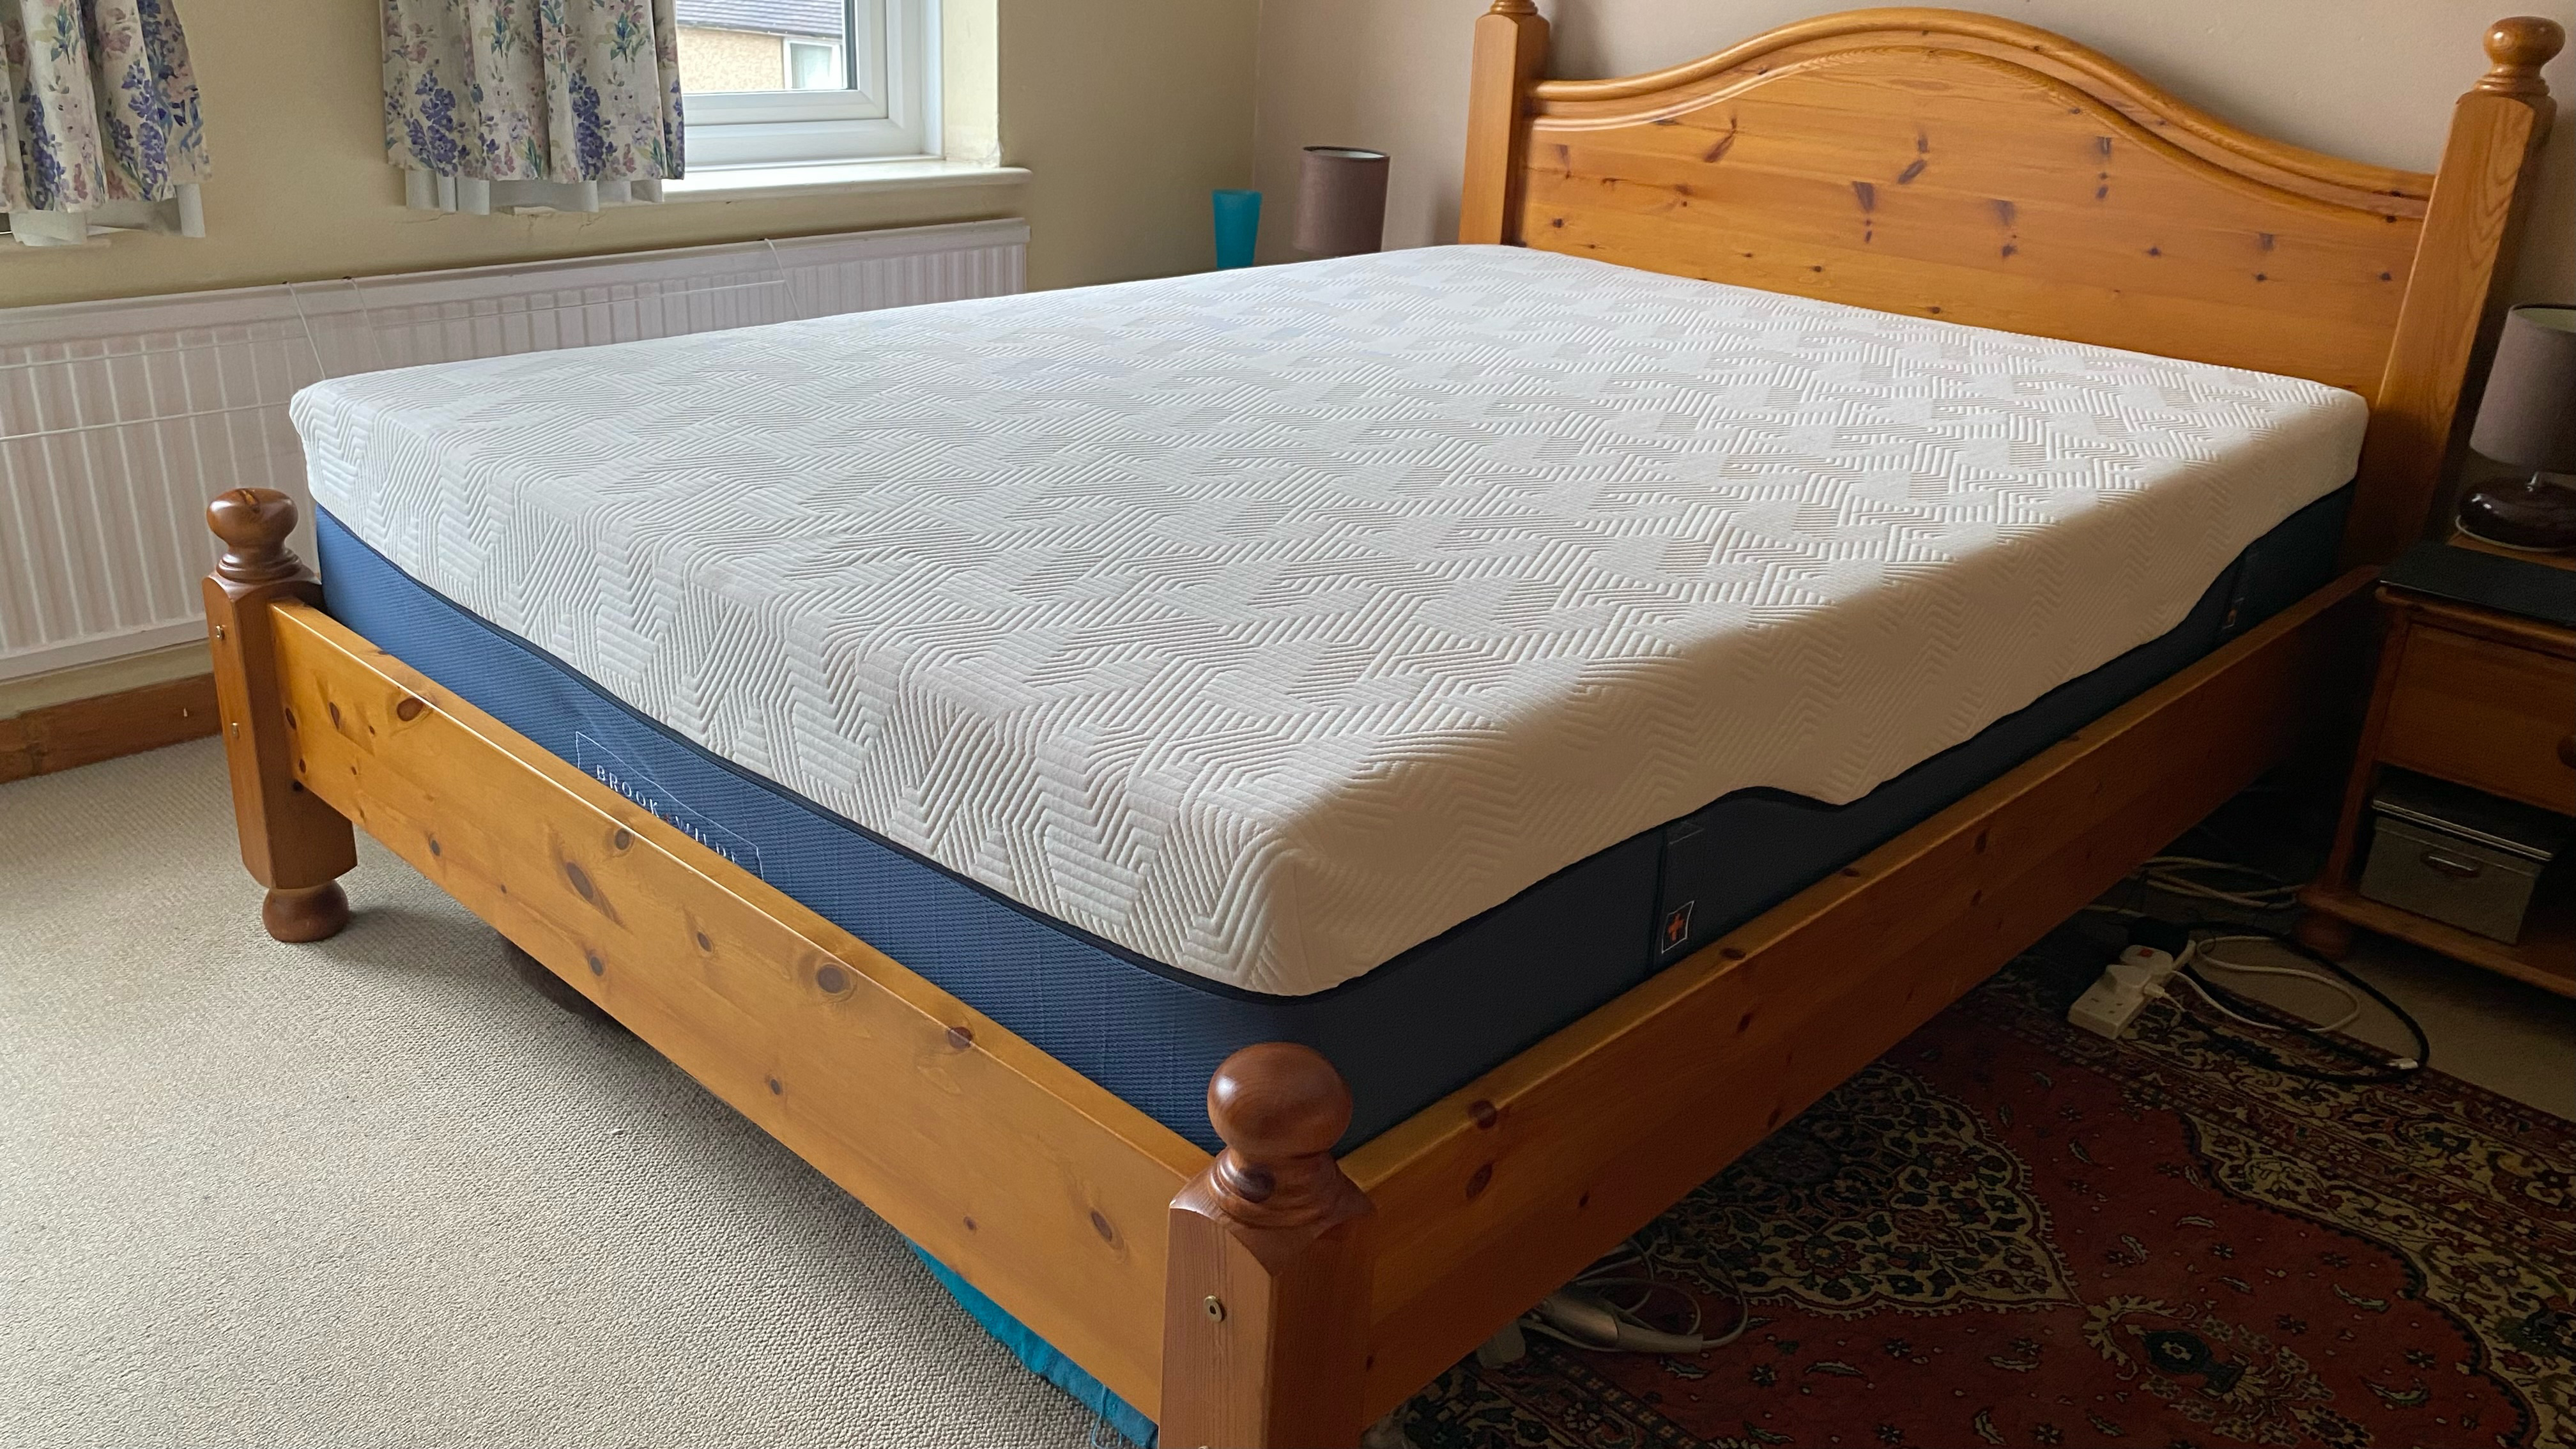 Brook + Wilde Suprema Mattress review image shows the mattress on our lead tester's wooden bed